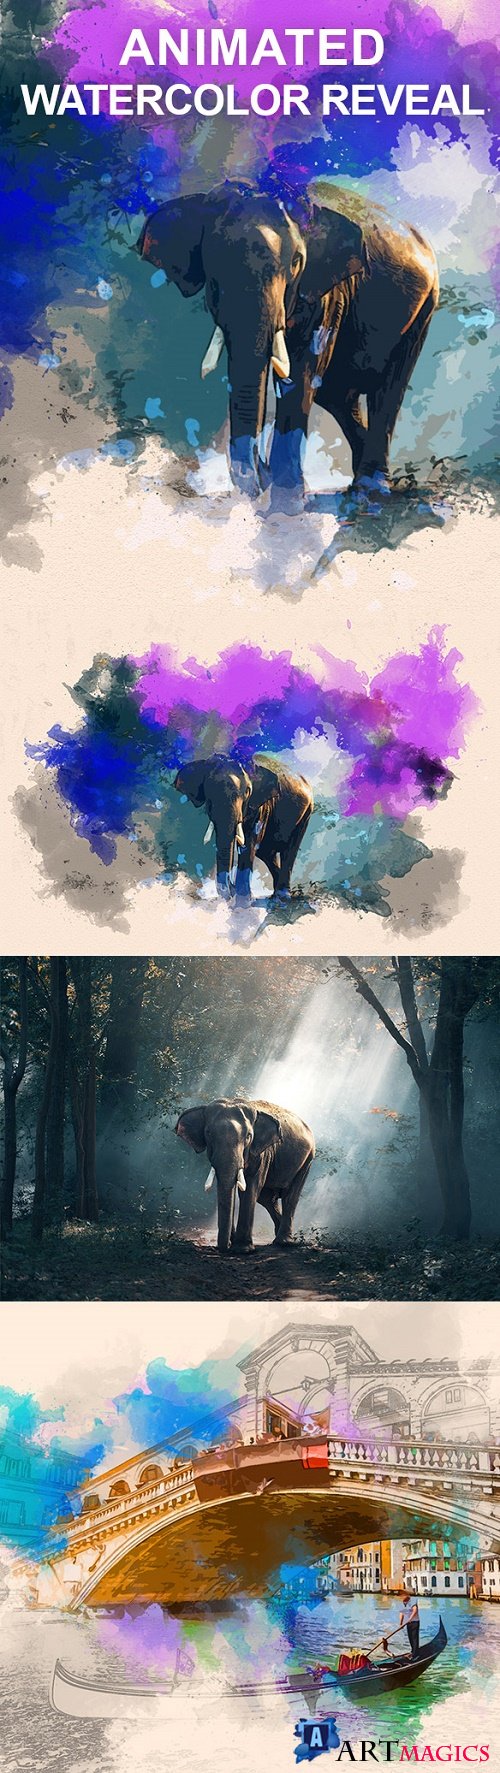 Animated Watercolor Reveal Photoshop Action 21721025